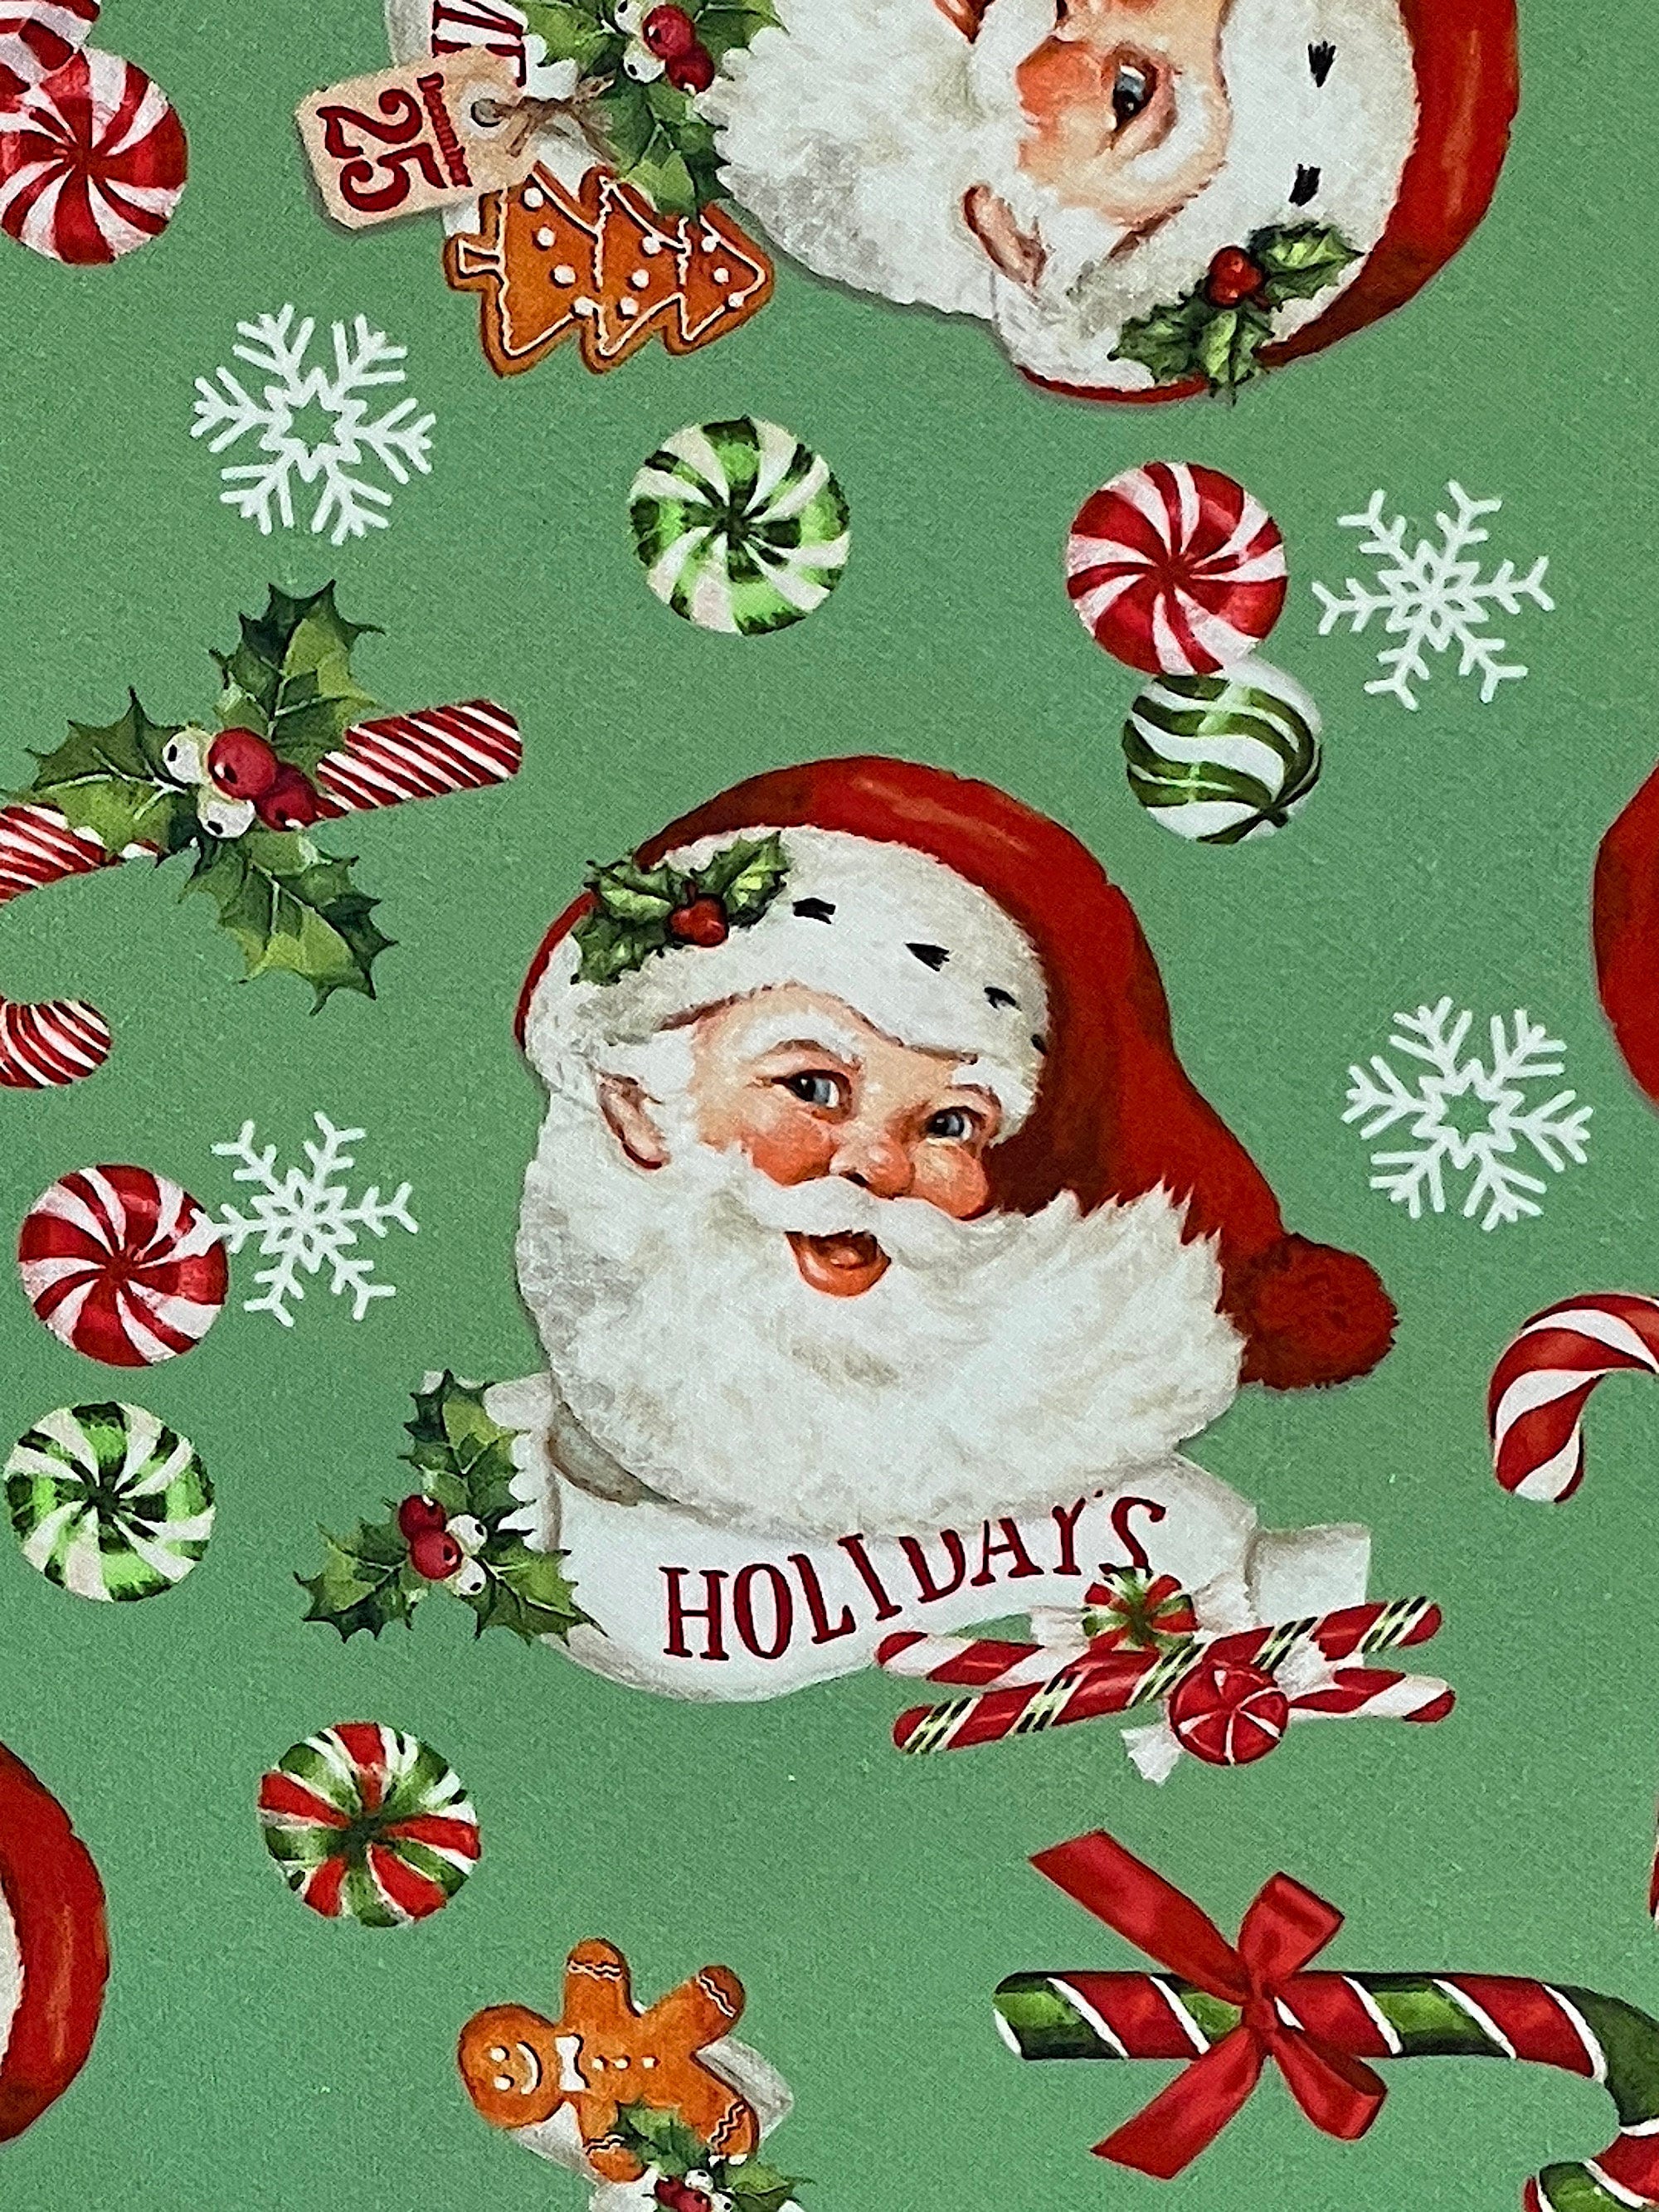 Close up of Santa Claus, candy, snowflakes on a green background.